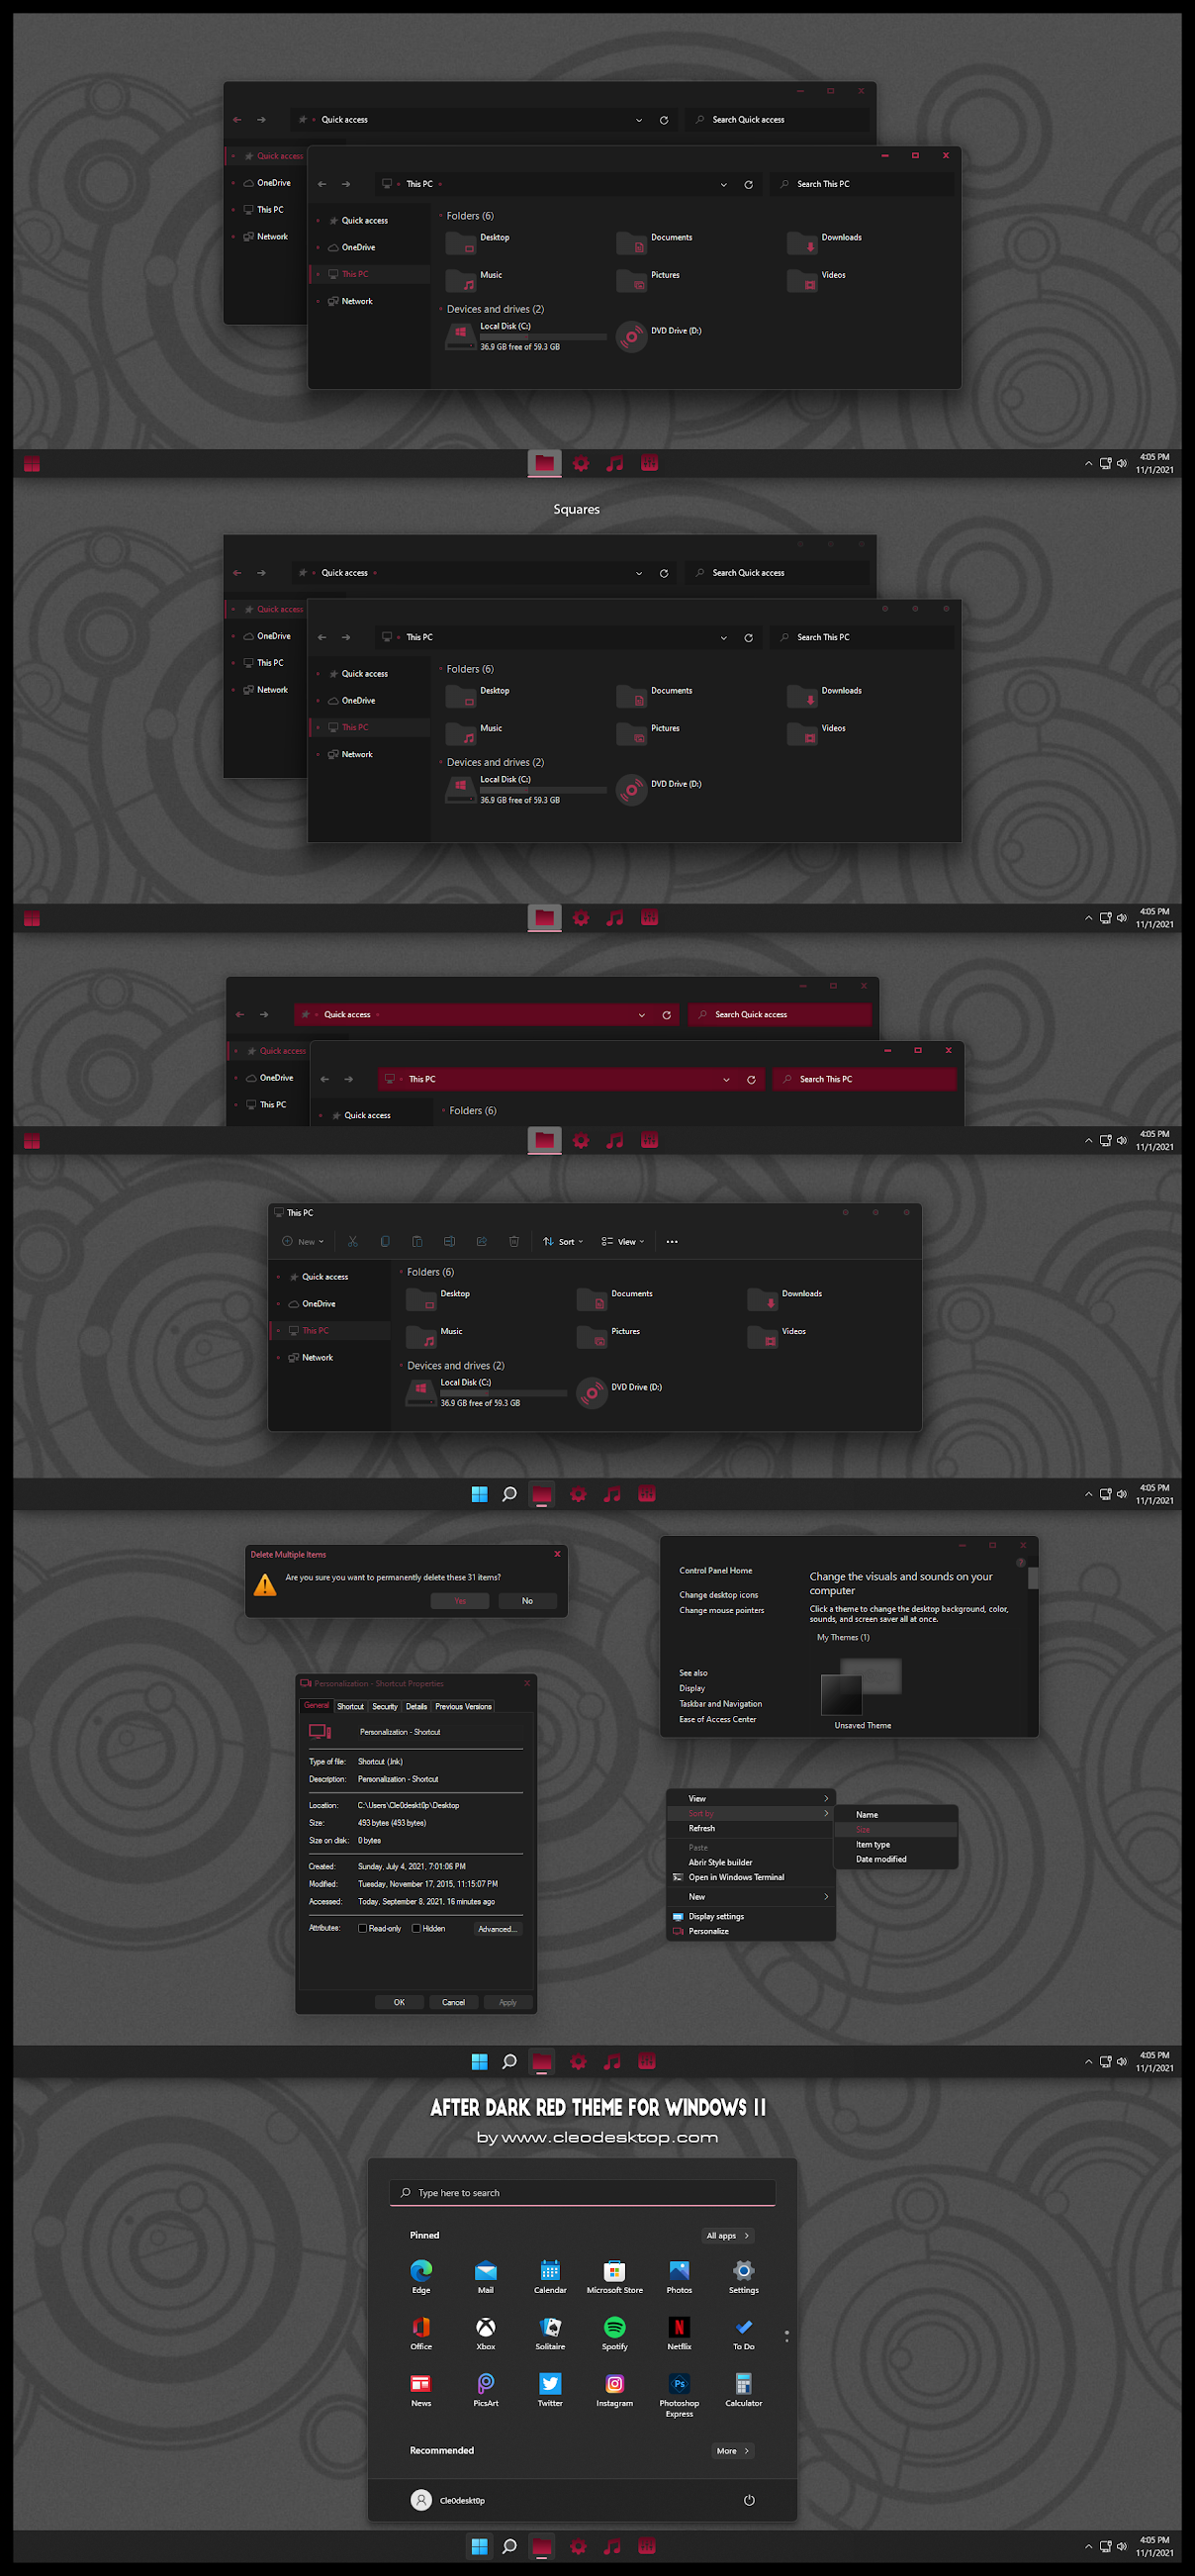 After Dark Red Theme For Windows 11